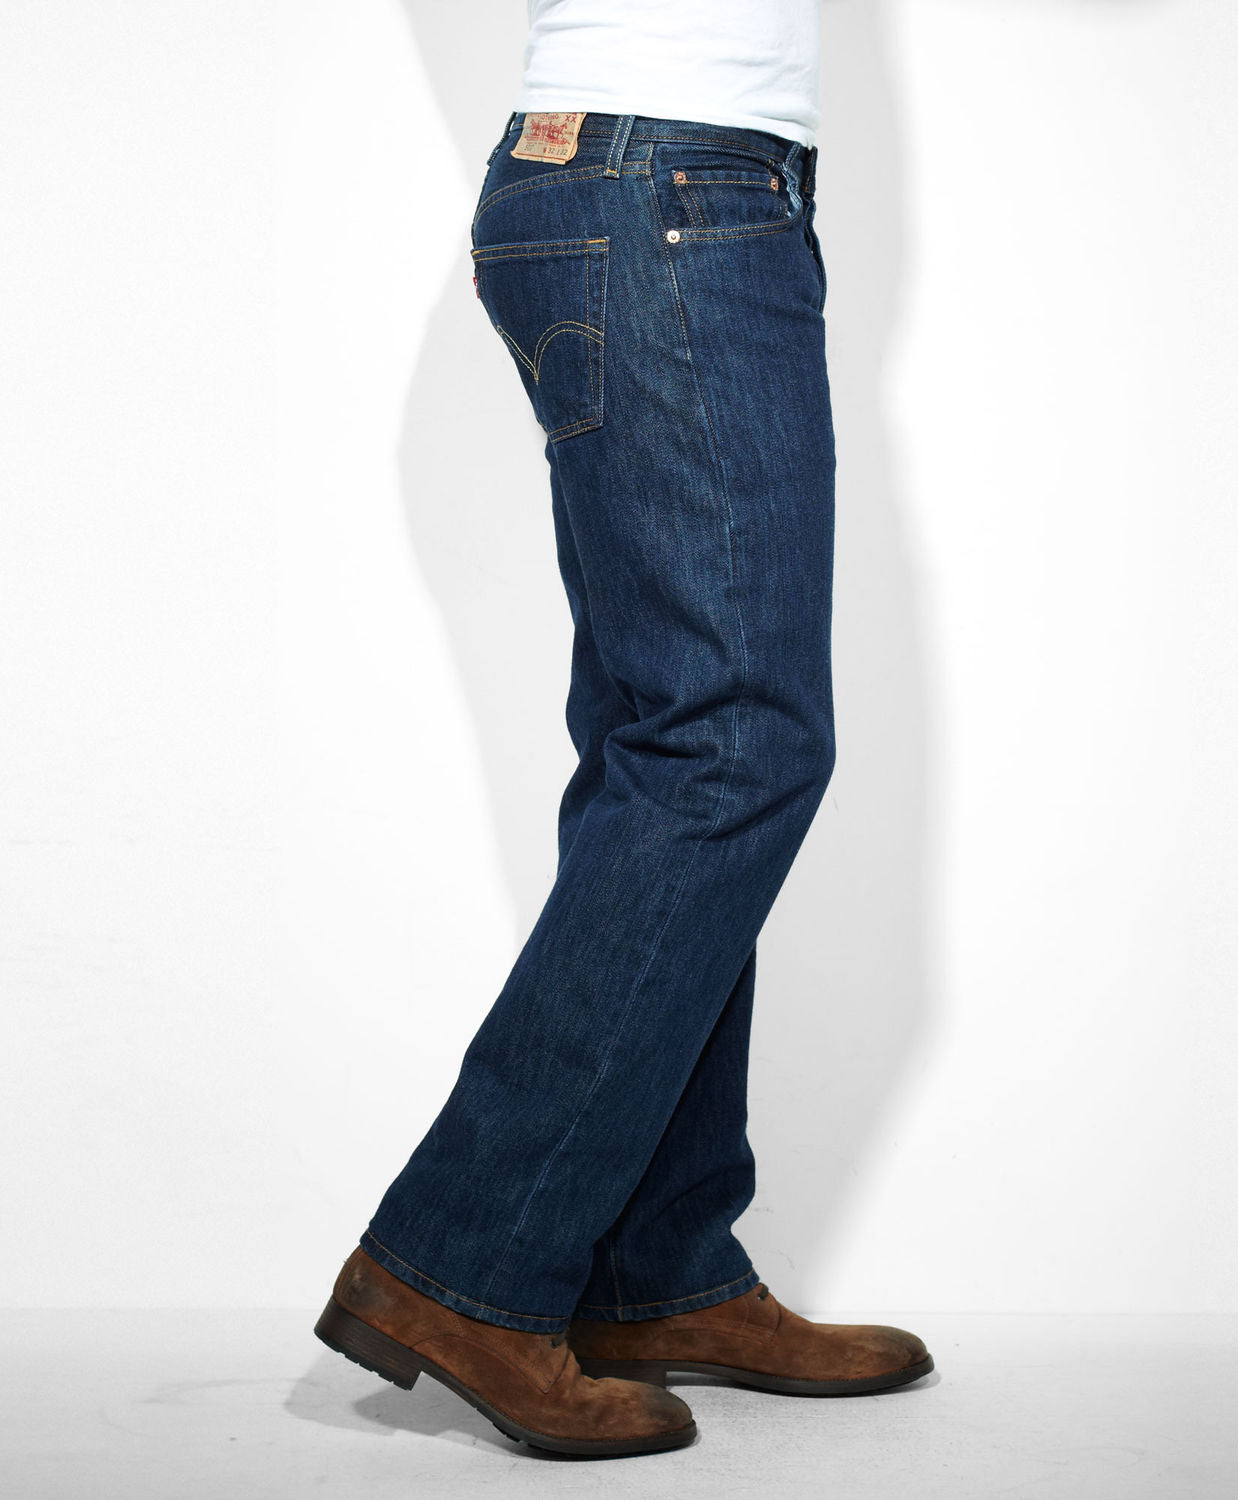 Levi's Men's 501 Original Shrink To Fit Jeans Straight Leg Button Fly